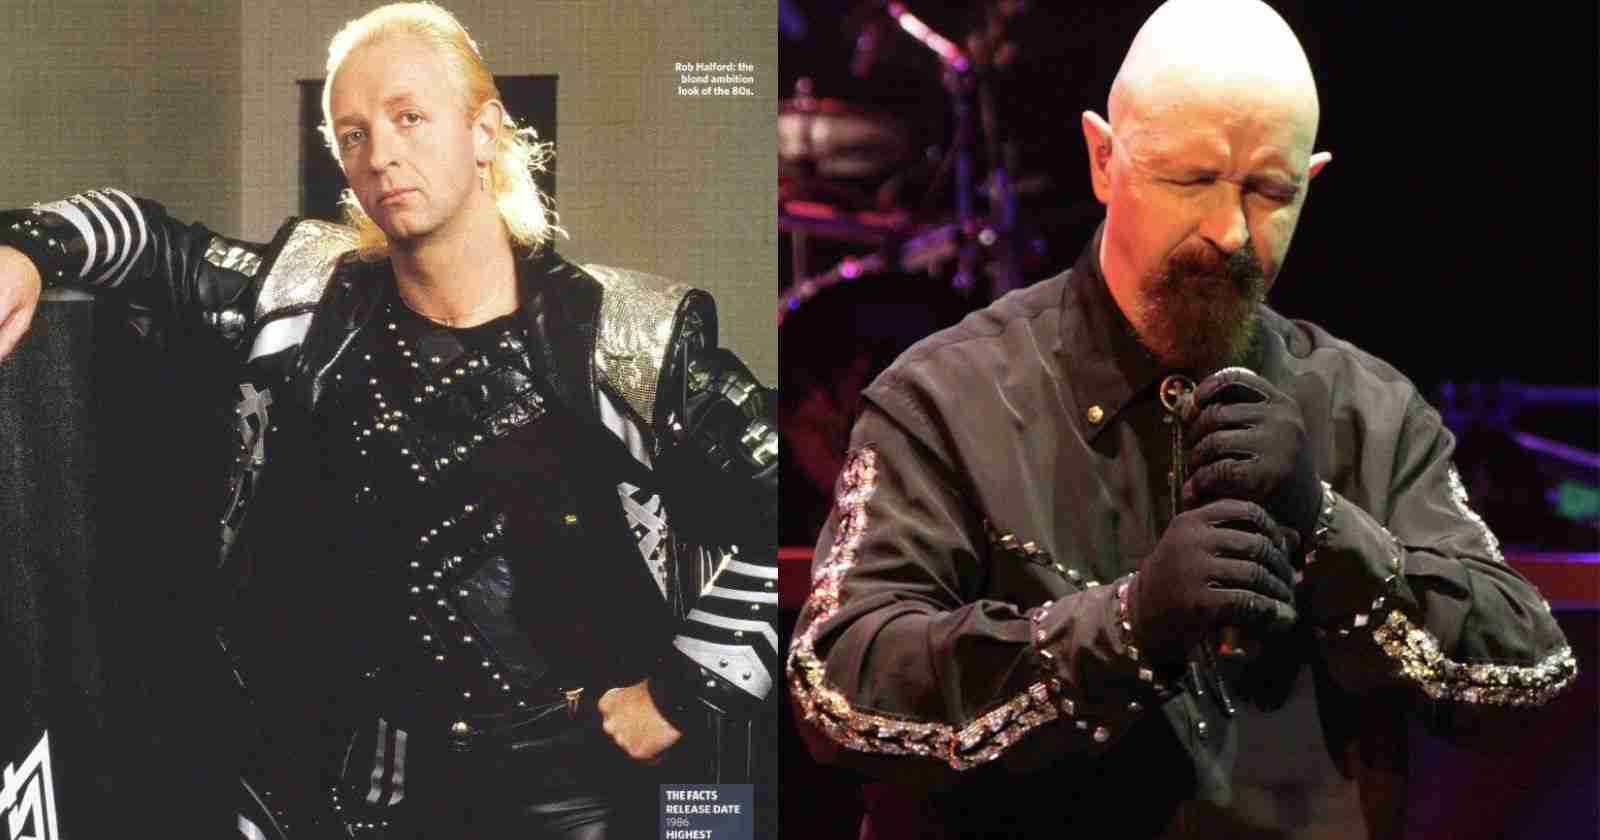 Rob Halford now and then